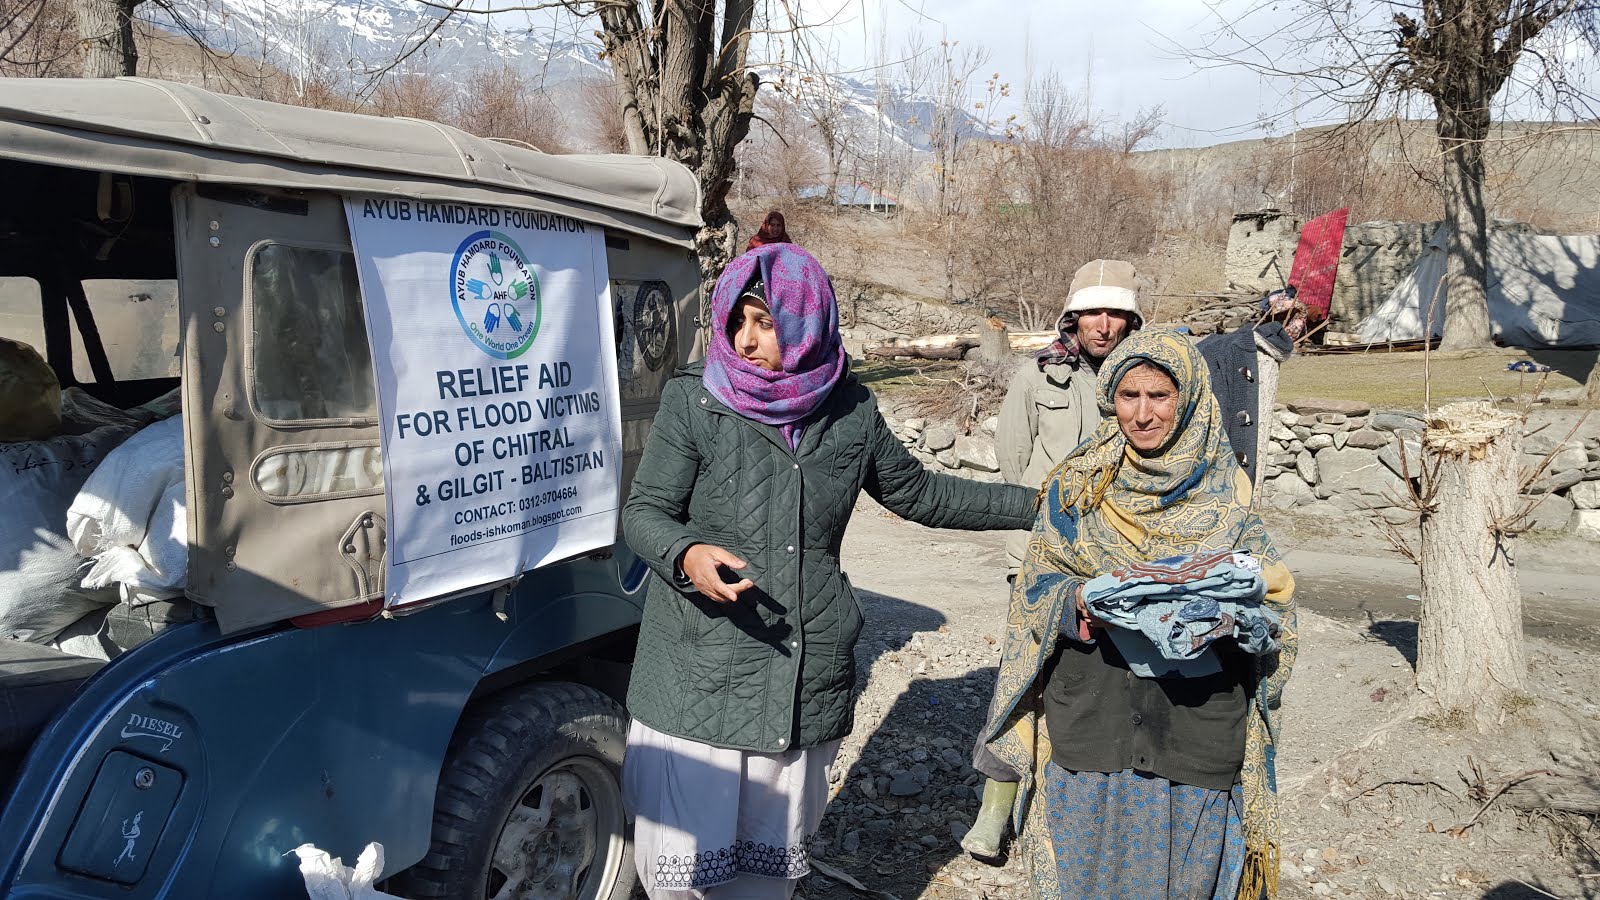 AYUB HAMDARD FOUNDATION RELIEF AID FOR CHITRAL FLOOD AND EARTHQUAKE VICTIMS DEC 2015